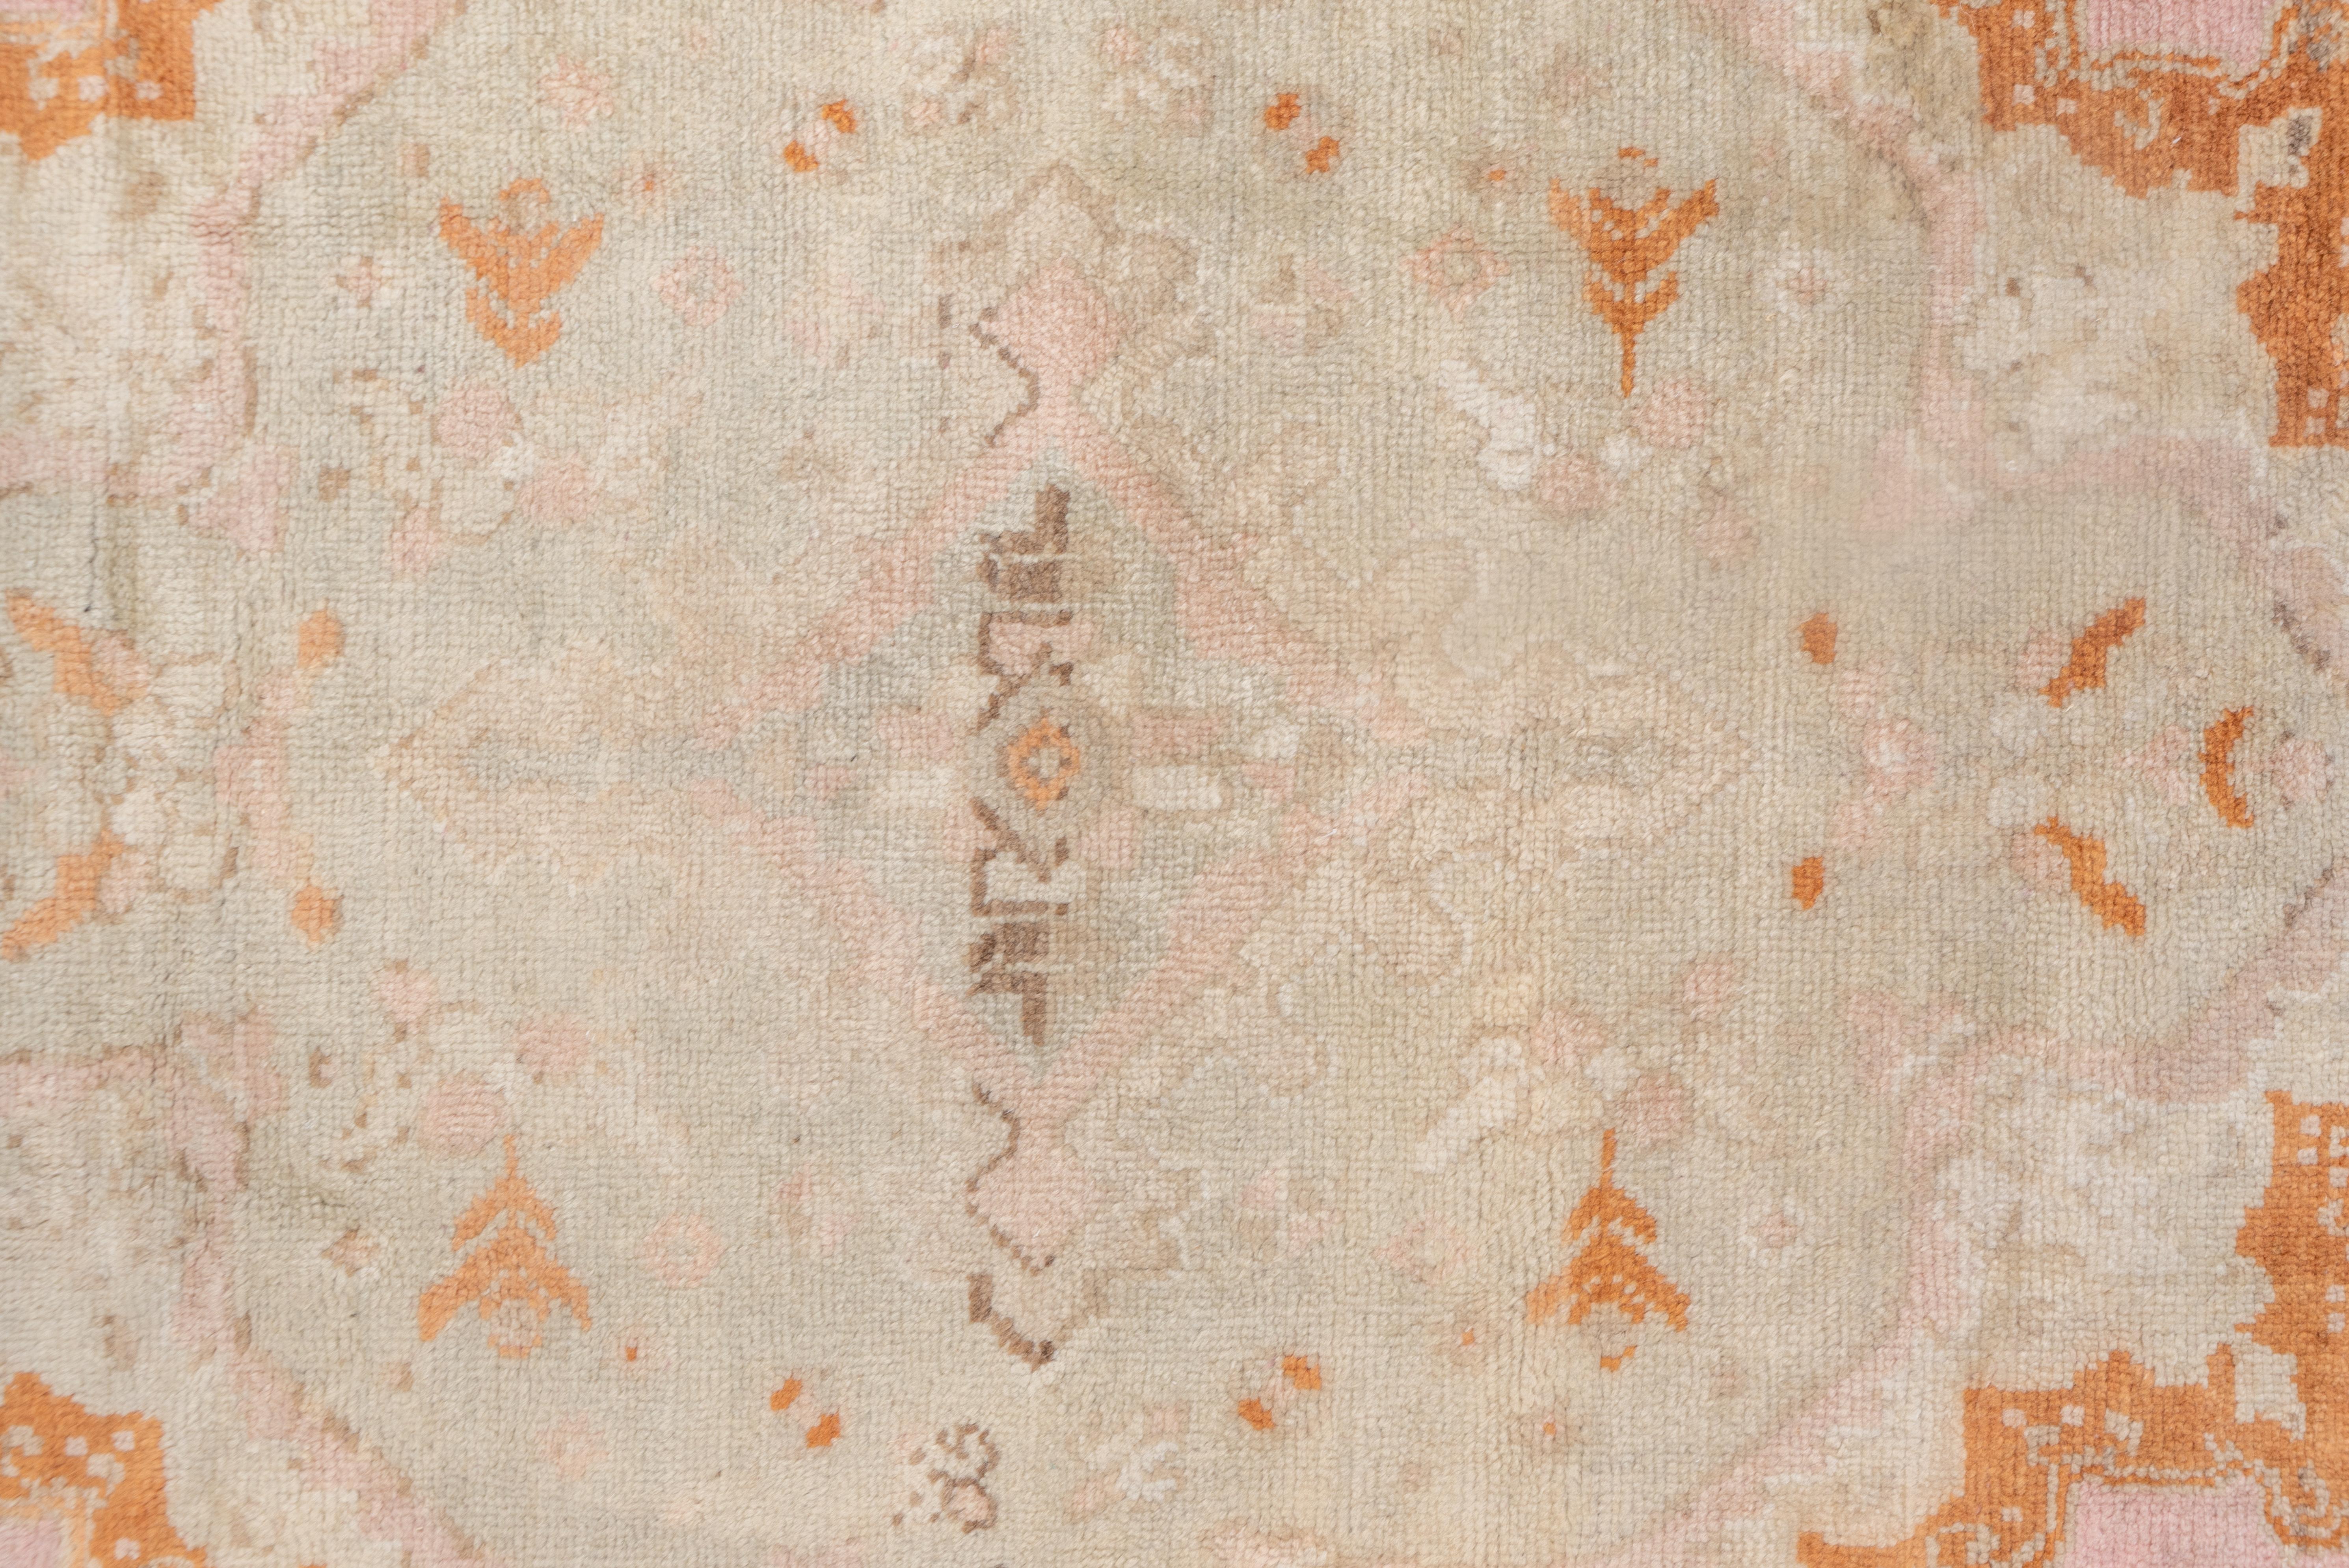 Massive Antique Turkish Oushak Mansion Carpet, Pink, Ivory & Orange Tones In Good Condition For Sale In New York, NY